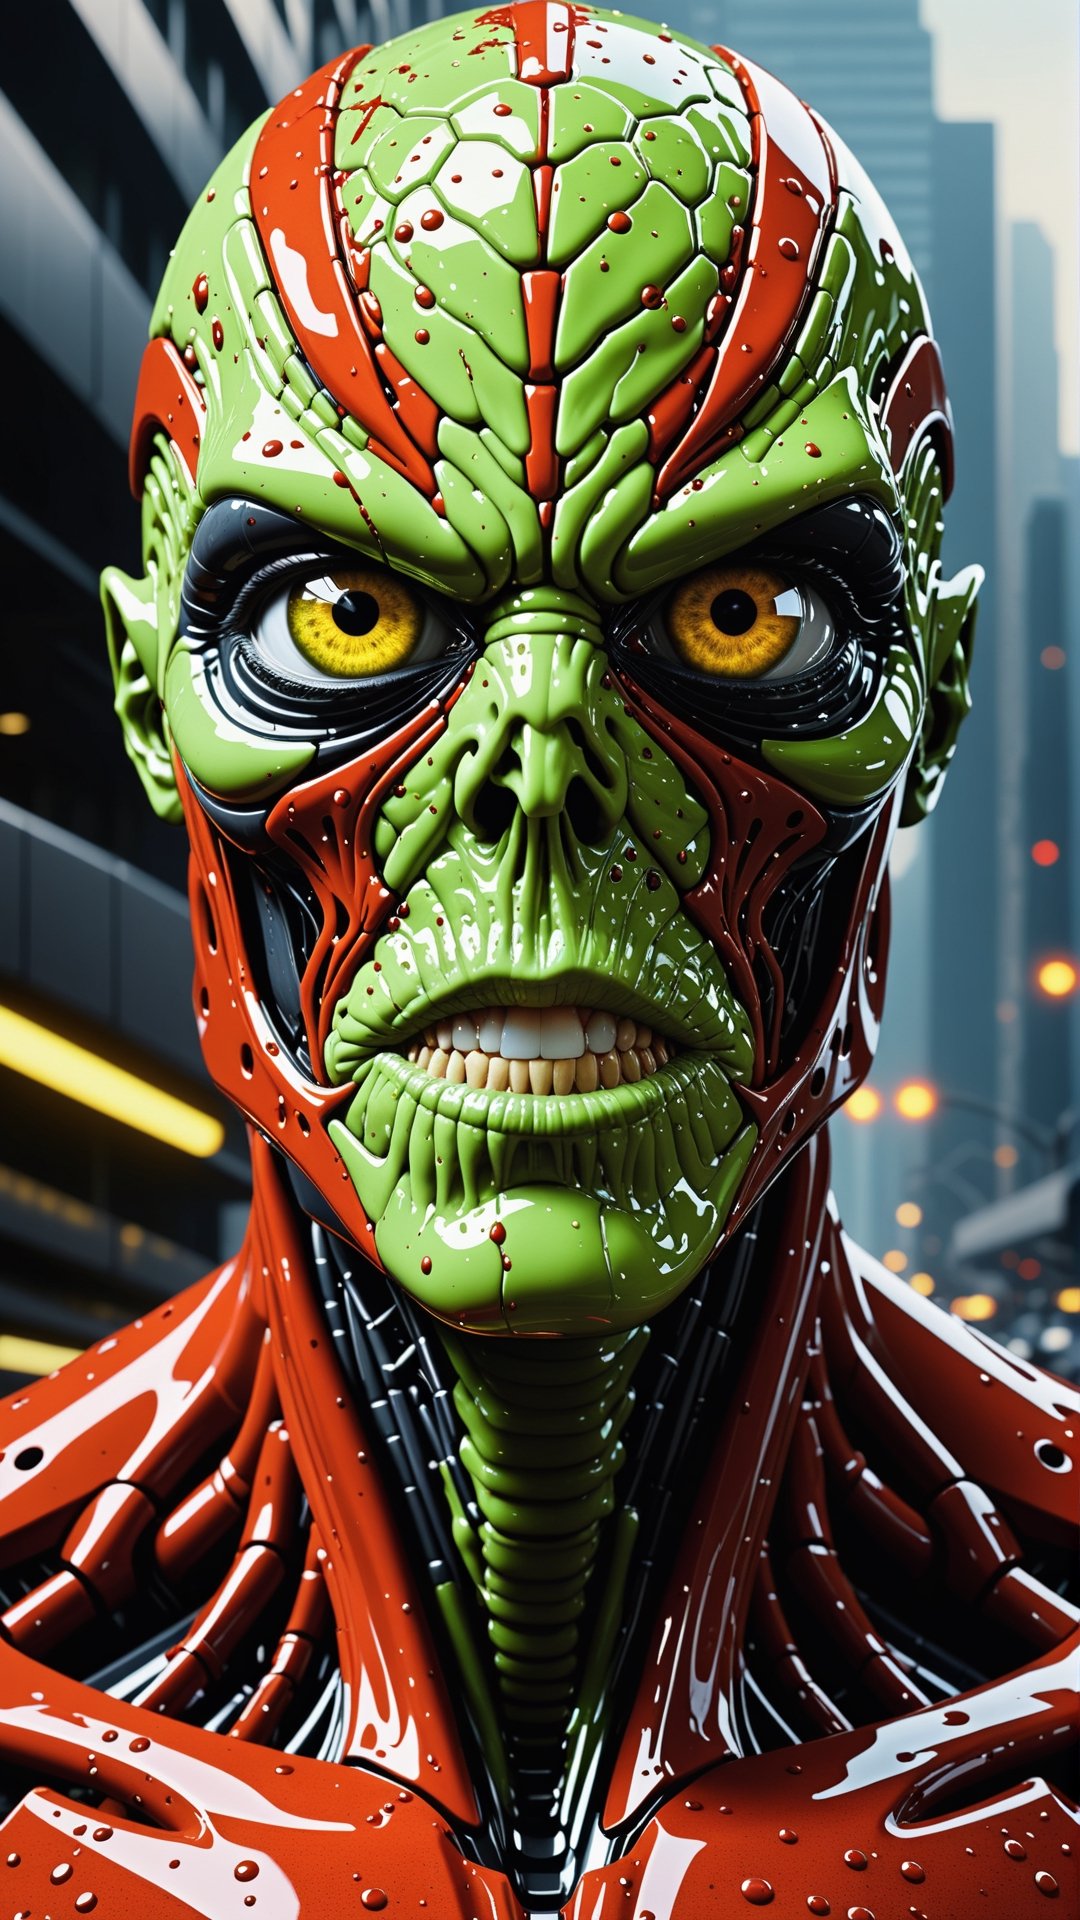 alien_zombie, cyclops, athletic, cream_yellow, creepy and scary, science fiction, futuristic, unreal, fantastic in a haunted landscape, upper body,

PNG image format, sharp lines and borders, solid blocks of colors, over 300ppp dots per inch, 32k ultra high definition, 530MP, Fujifilm XT3, cinematographic, (photorealistic:1.6), 4D, High definition RAW color professional photos, photo, masterpiece, realistic, ProRAW, realism, photorealism, high contrast, digital art trending on Artstation ultra high definition detailed realistic, detailed, skin texture, hyper detailed, realistic skin texture, facial features, armature, best quality, ultra high res, high resolution, detailed, raw photo, sharp re, lens rich colors hyper realistic lifelike texture dramatic lighting unrealengine trending, ultra sharp, pictorial technique, (sharpness, definition and photographic precision), (contrast, depth and harmonious light details), (features, proportions, colors and textures at their highest degree of realism), (blur background, clean and uncluttered visual aesthetics, sense of depth and dimension, professional and polished look of the image), work of beauty and complexity. perfectly symmetrical body.

(aesthetic + beautiful + harmonic:1.5), (ultra detailed face, ultra detailed eyes, ultra detailed mouth, ultra detailed body, ultra detailed hands, ultra detailed clothes, ultra detailed background, ultra detailed scenery:1.5),

3d_toon_xl:0.8, JuggerCineXL2:0.9, detail_master_XL:0.9, detailmaster2.0:0.9, perfecteyes-000007:1.3,monster